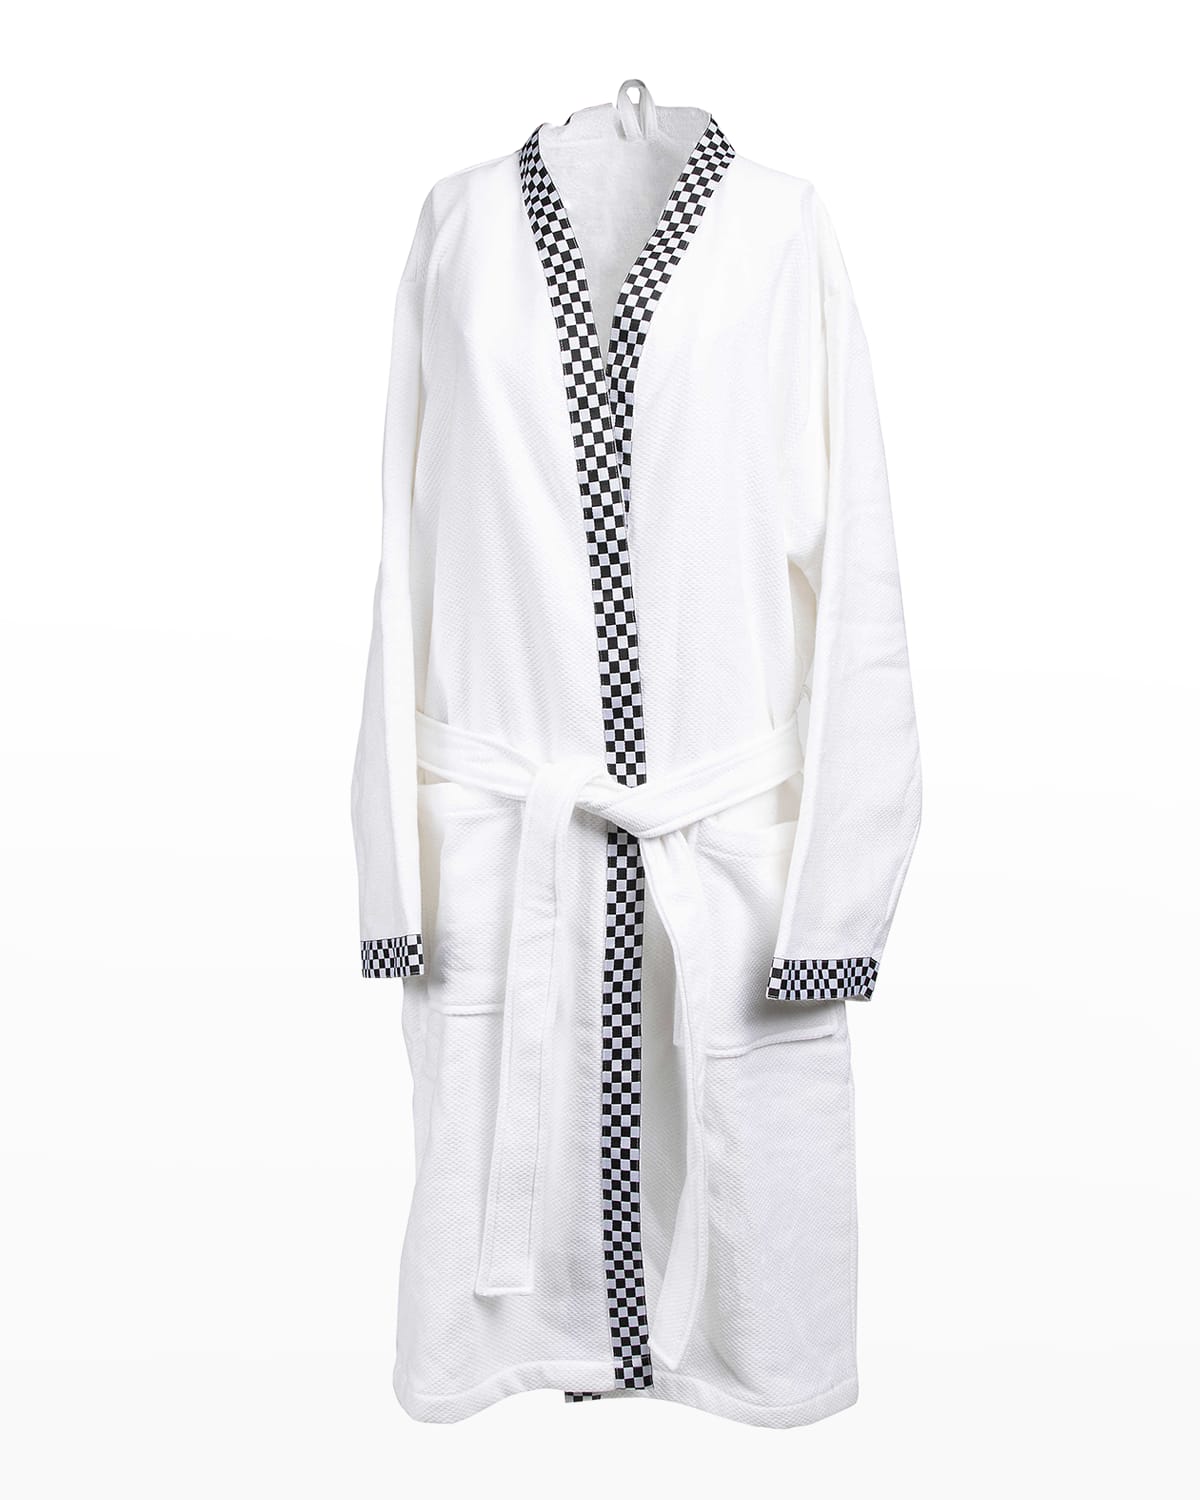 Mackenzie-childs Courtly Spa Robe, Extra Large In White